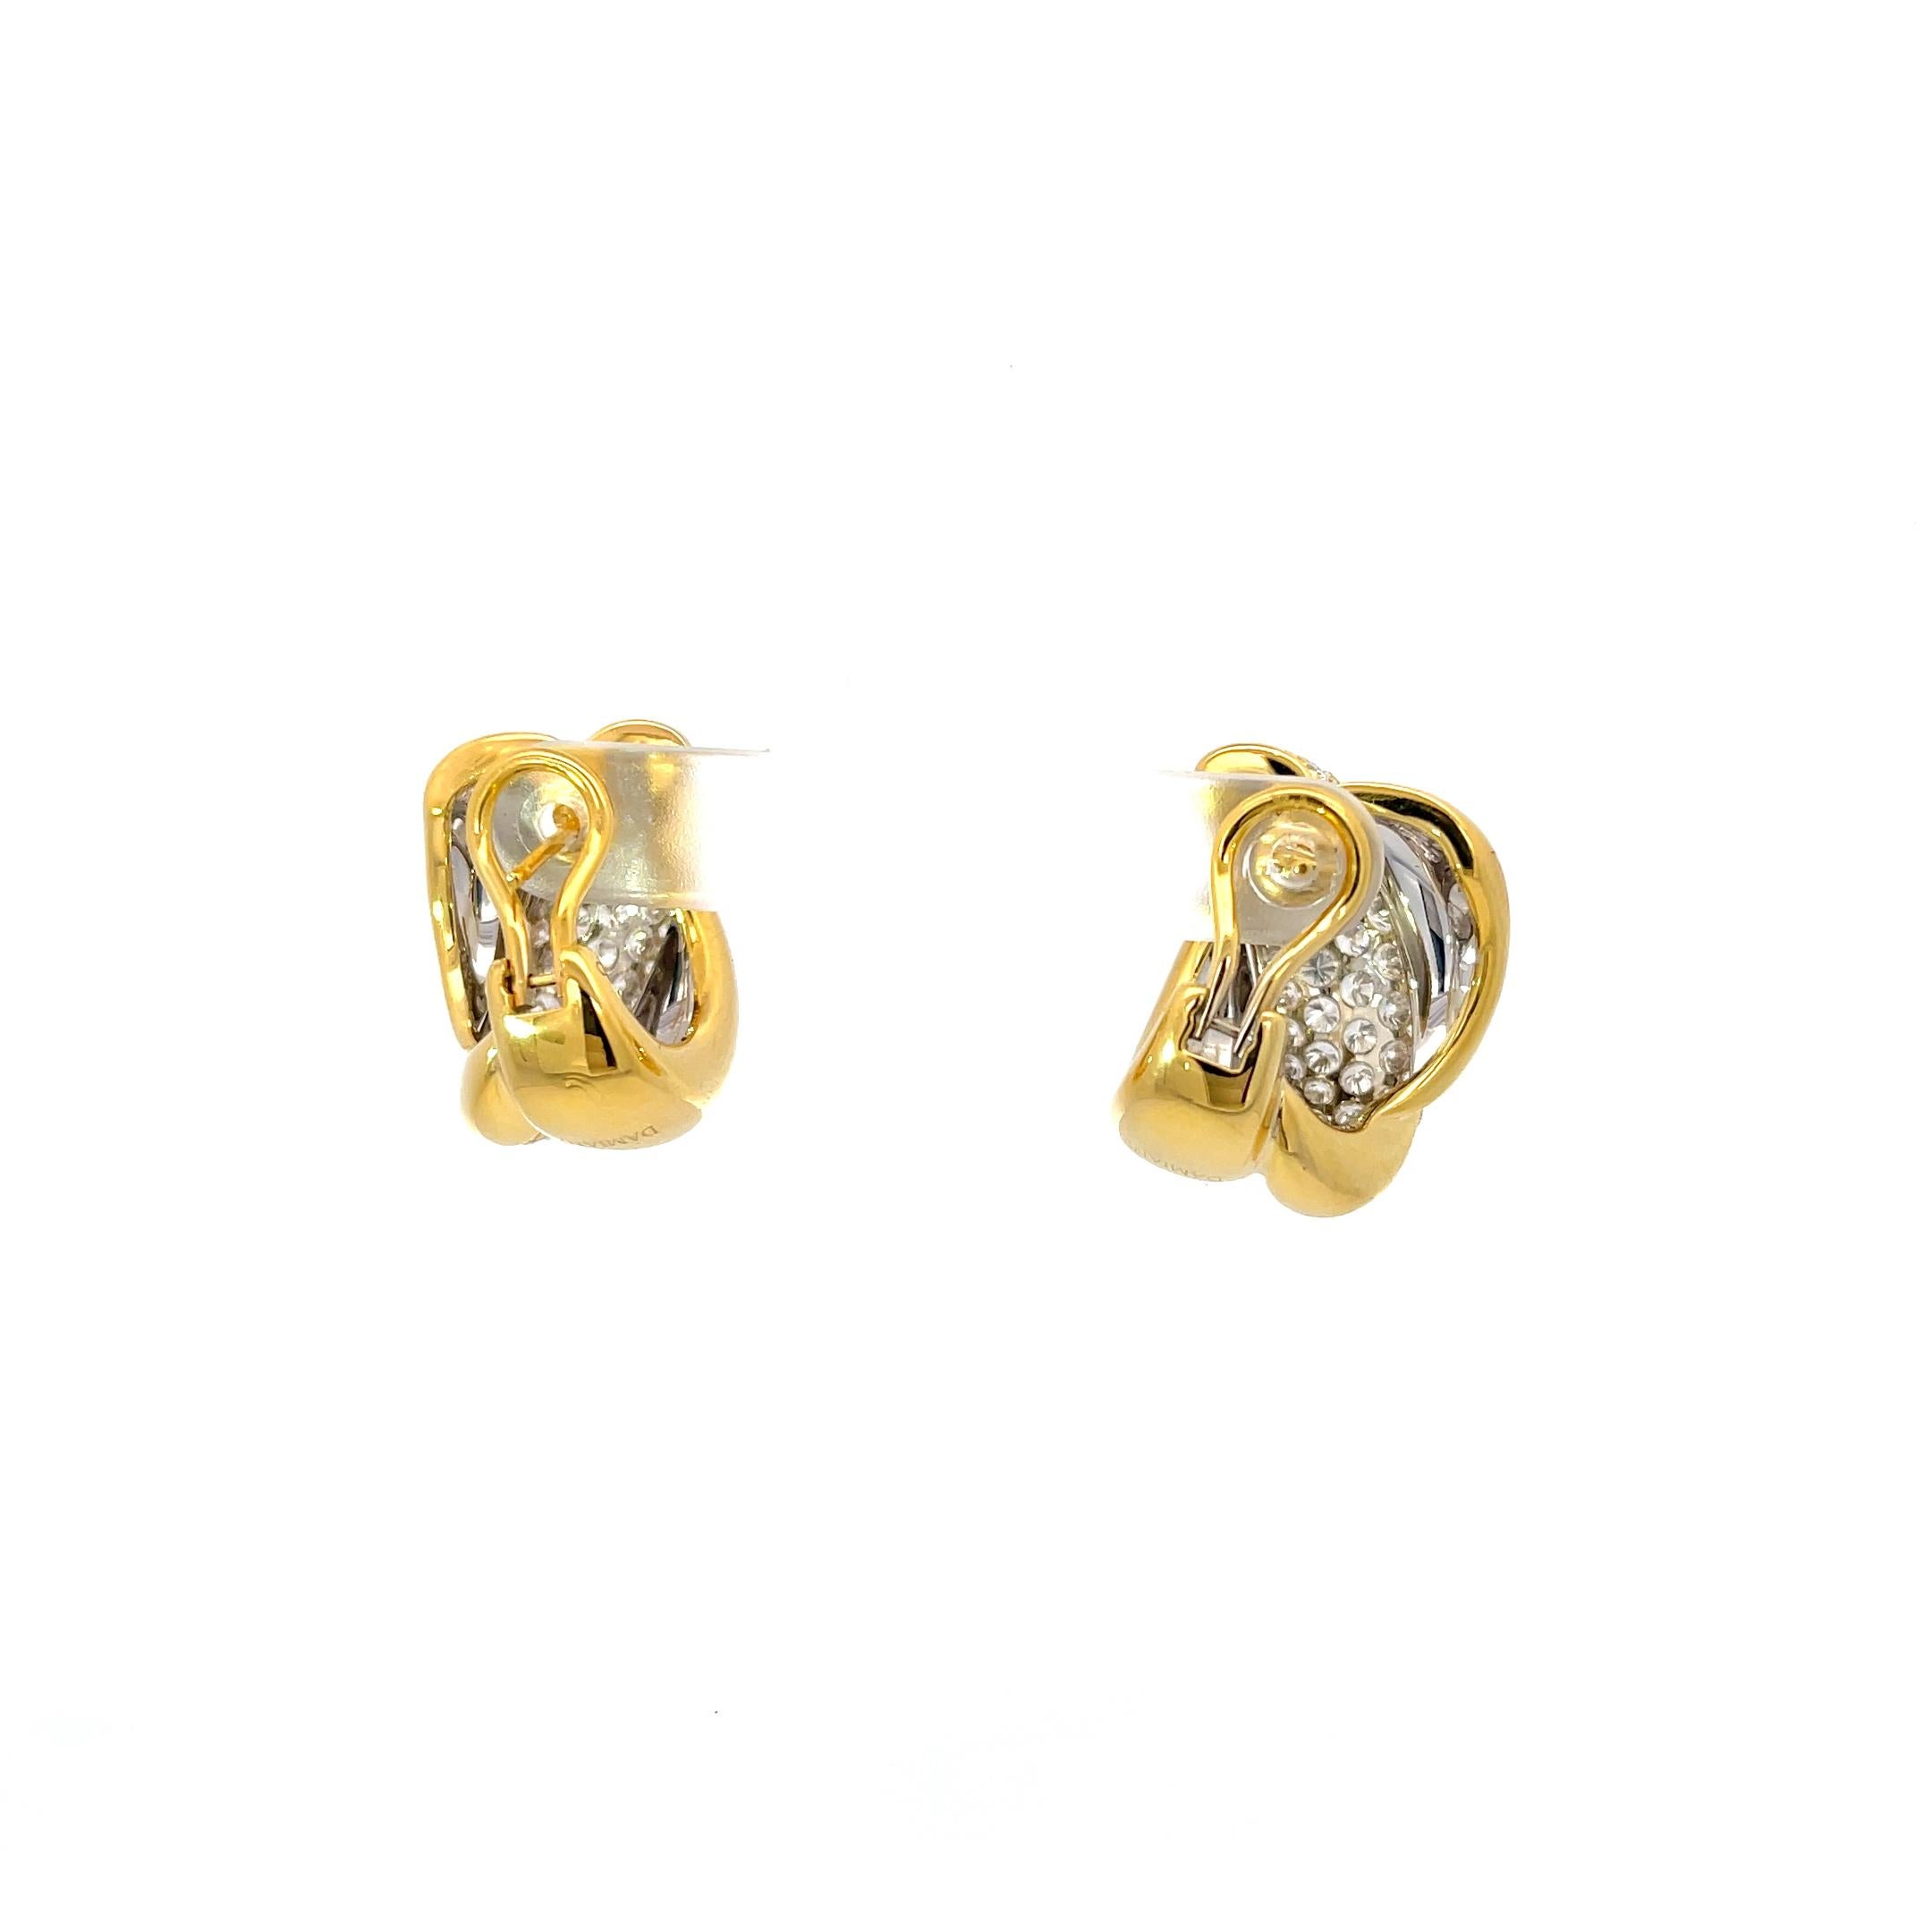 Damiani Pave Diamond Hoops 18K Yellow Gold In Excellent Condition For Sale In Dallas, TX